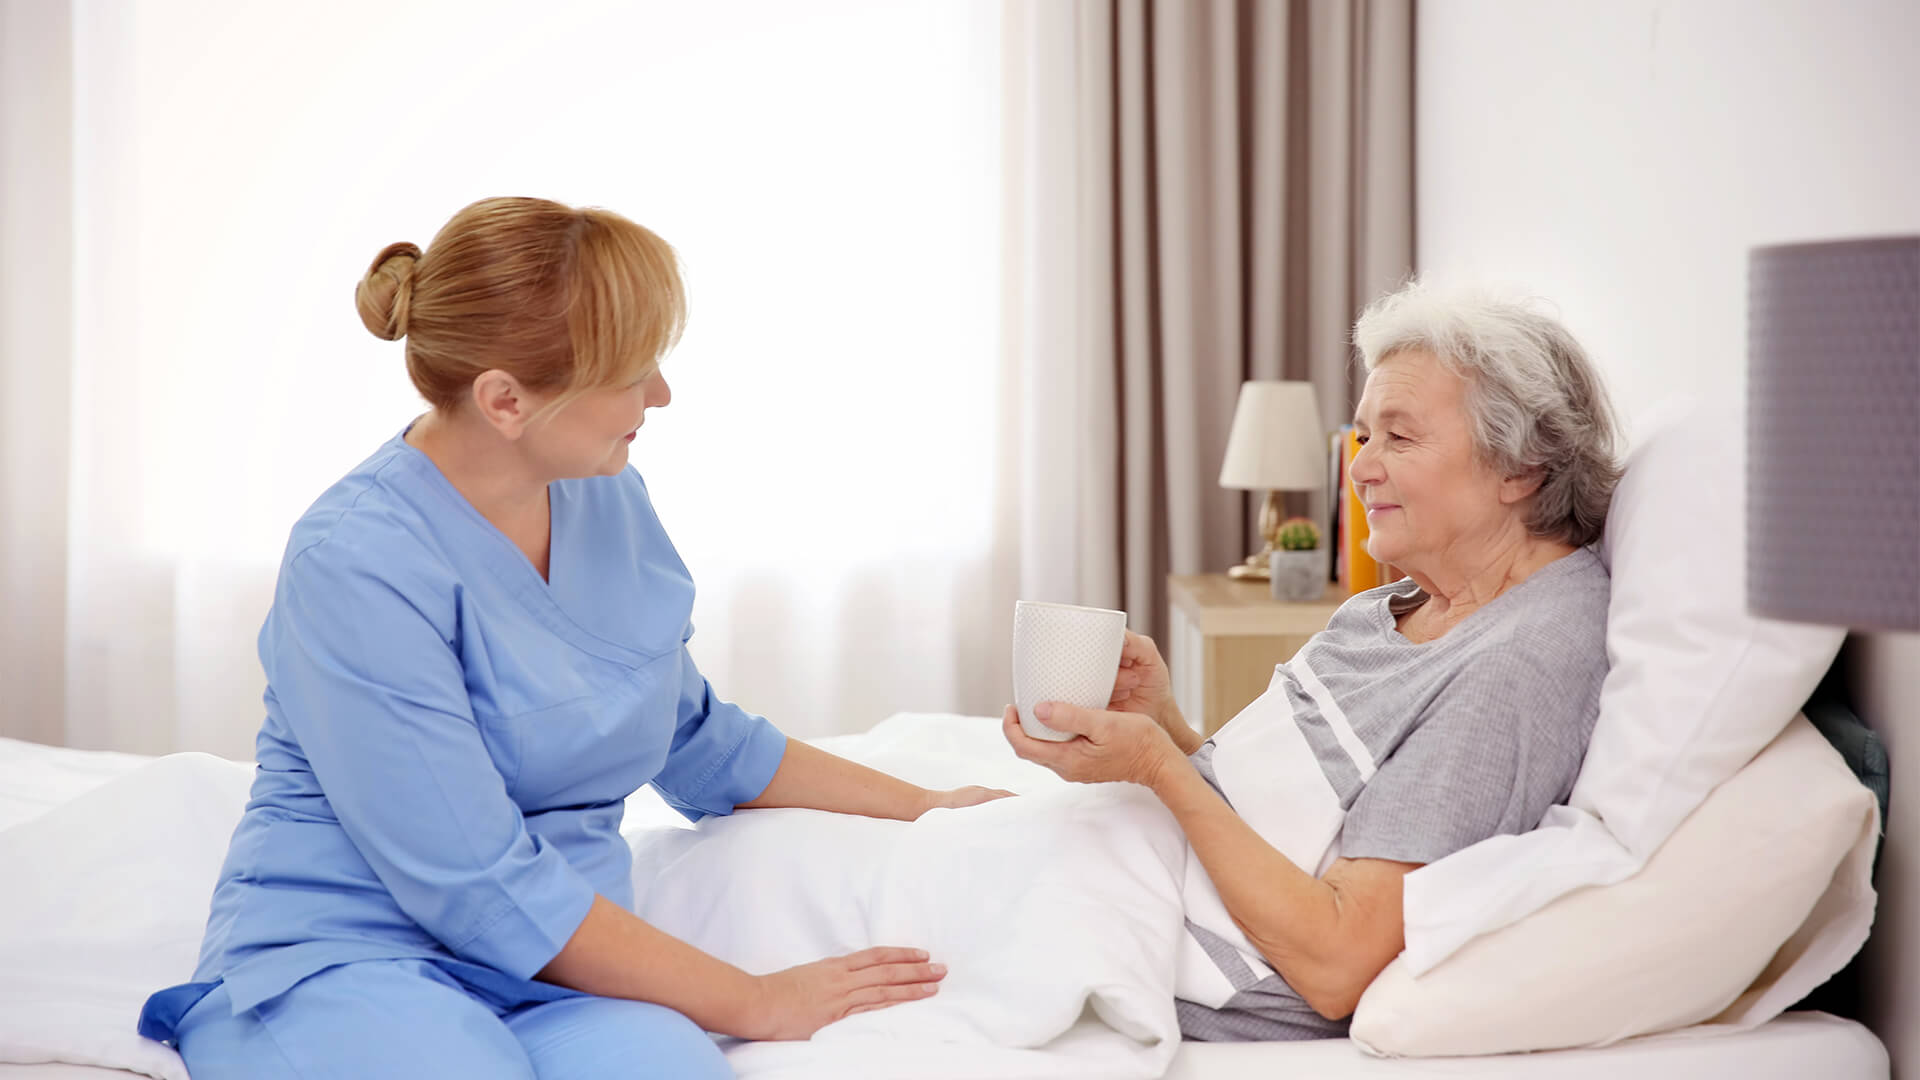 How To Choose The Right Home Health Care Service For Your Family